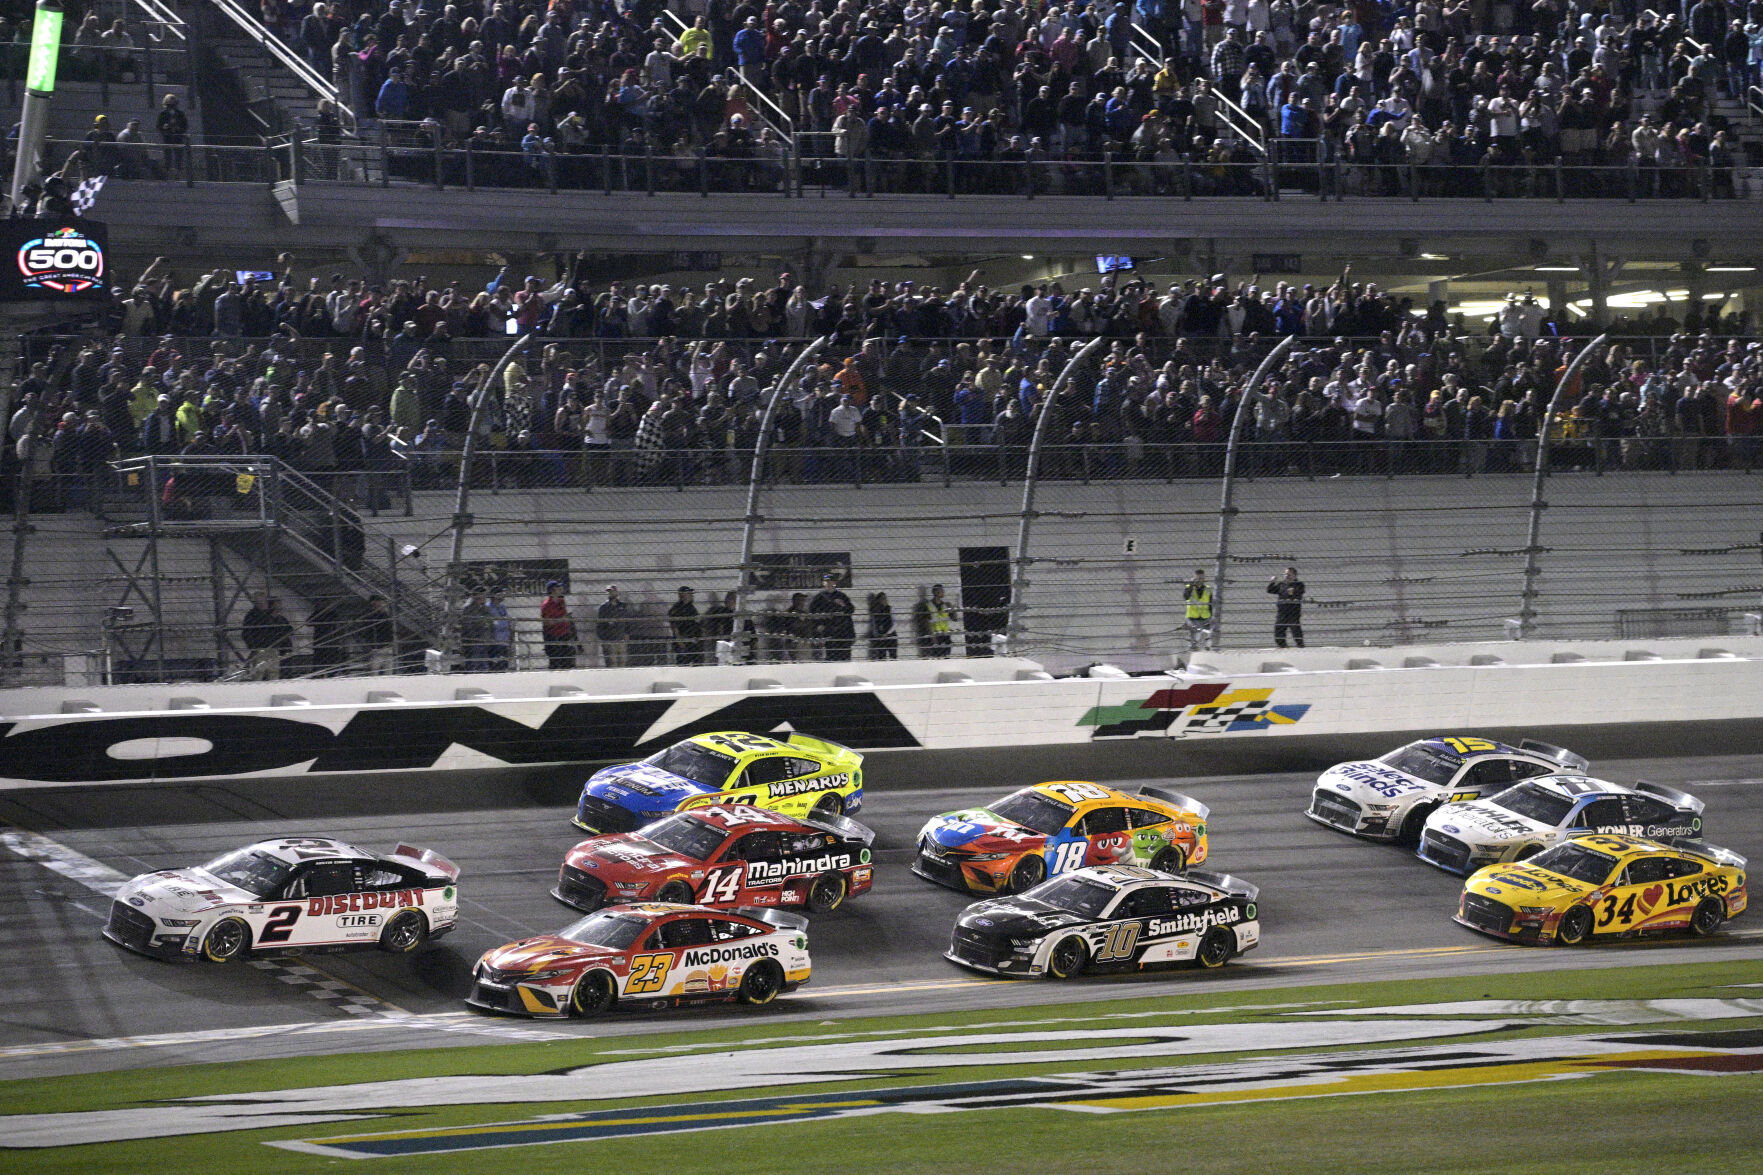 NASCAR Preview 75th season one of celebration and transition